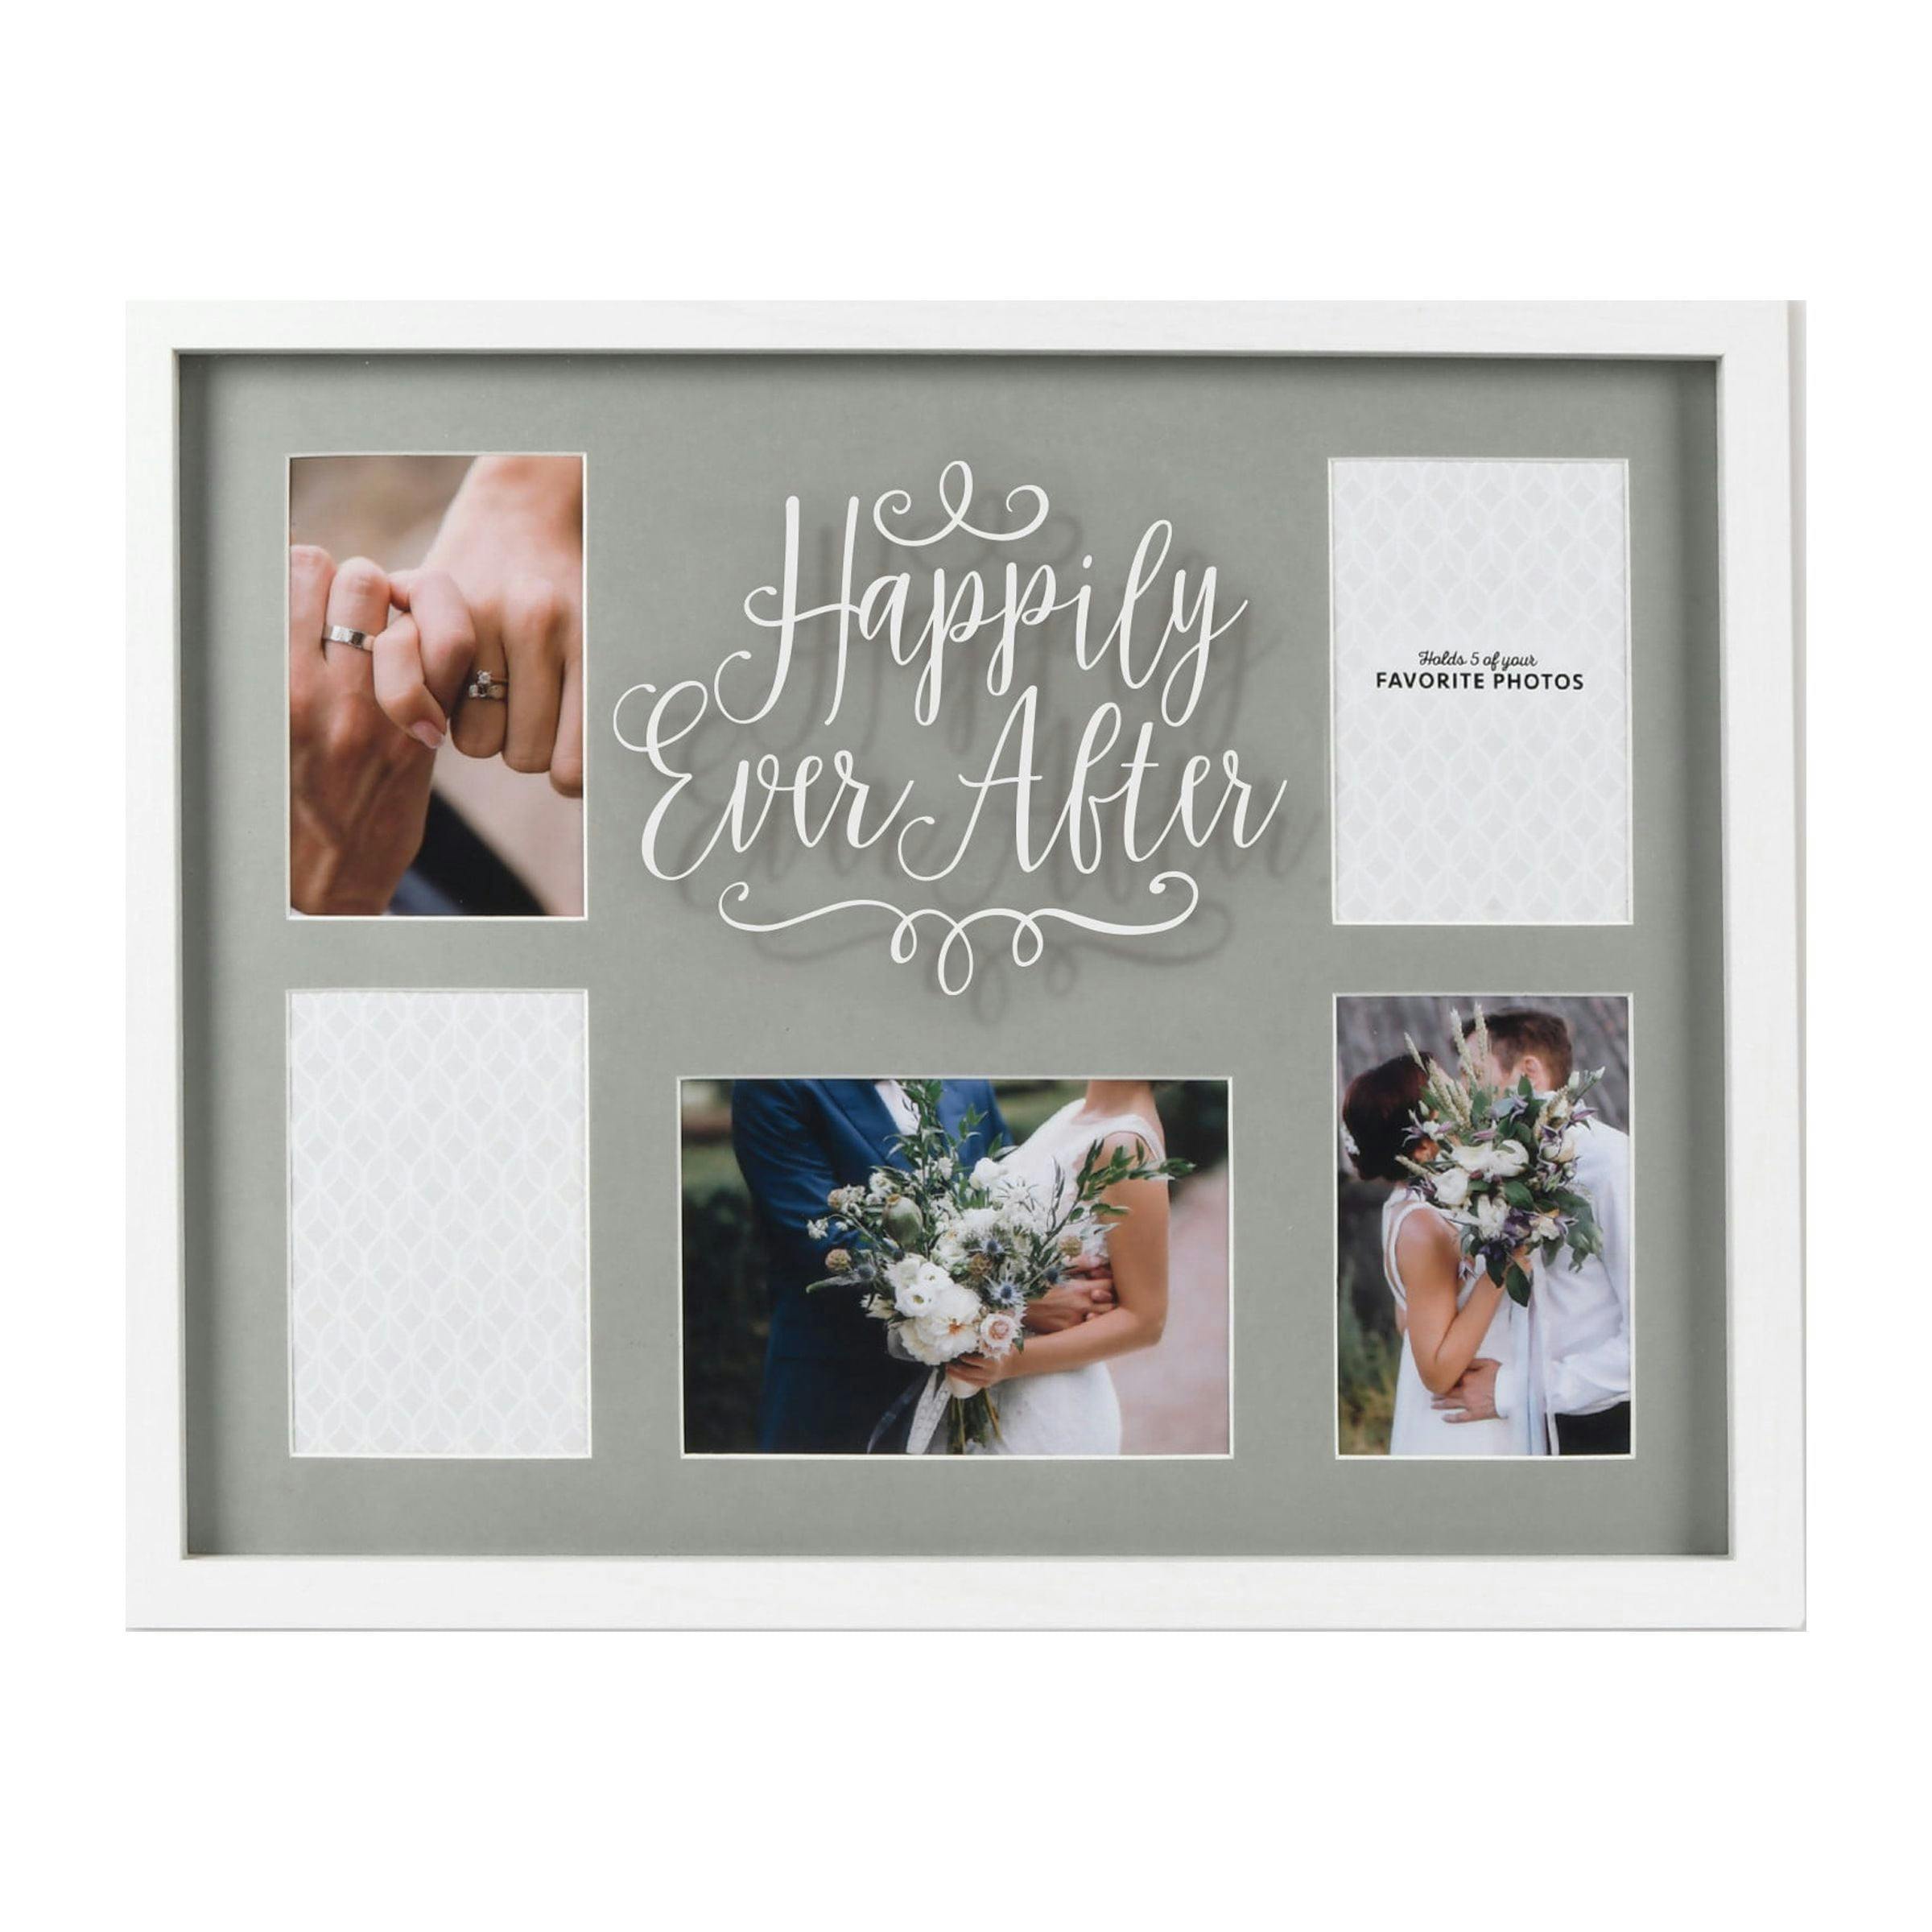 Classic White Wedding 20"x16" Wall-Mounted Picture Frame Collage